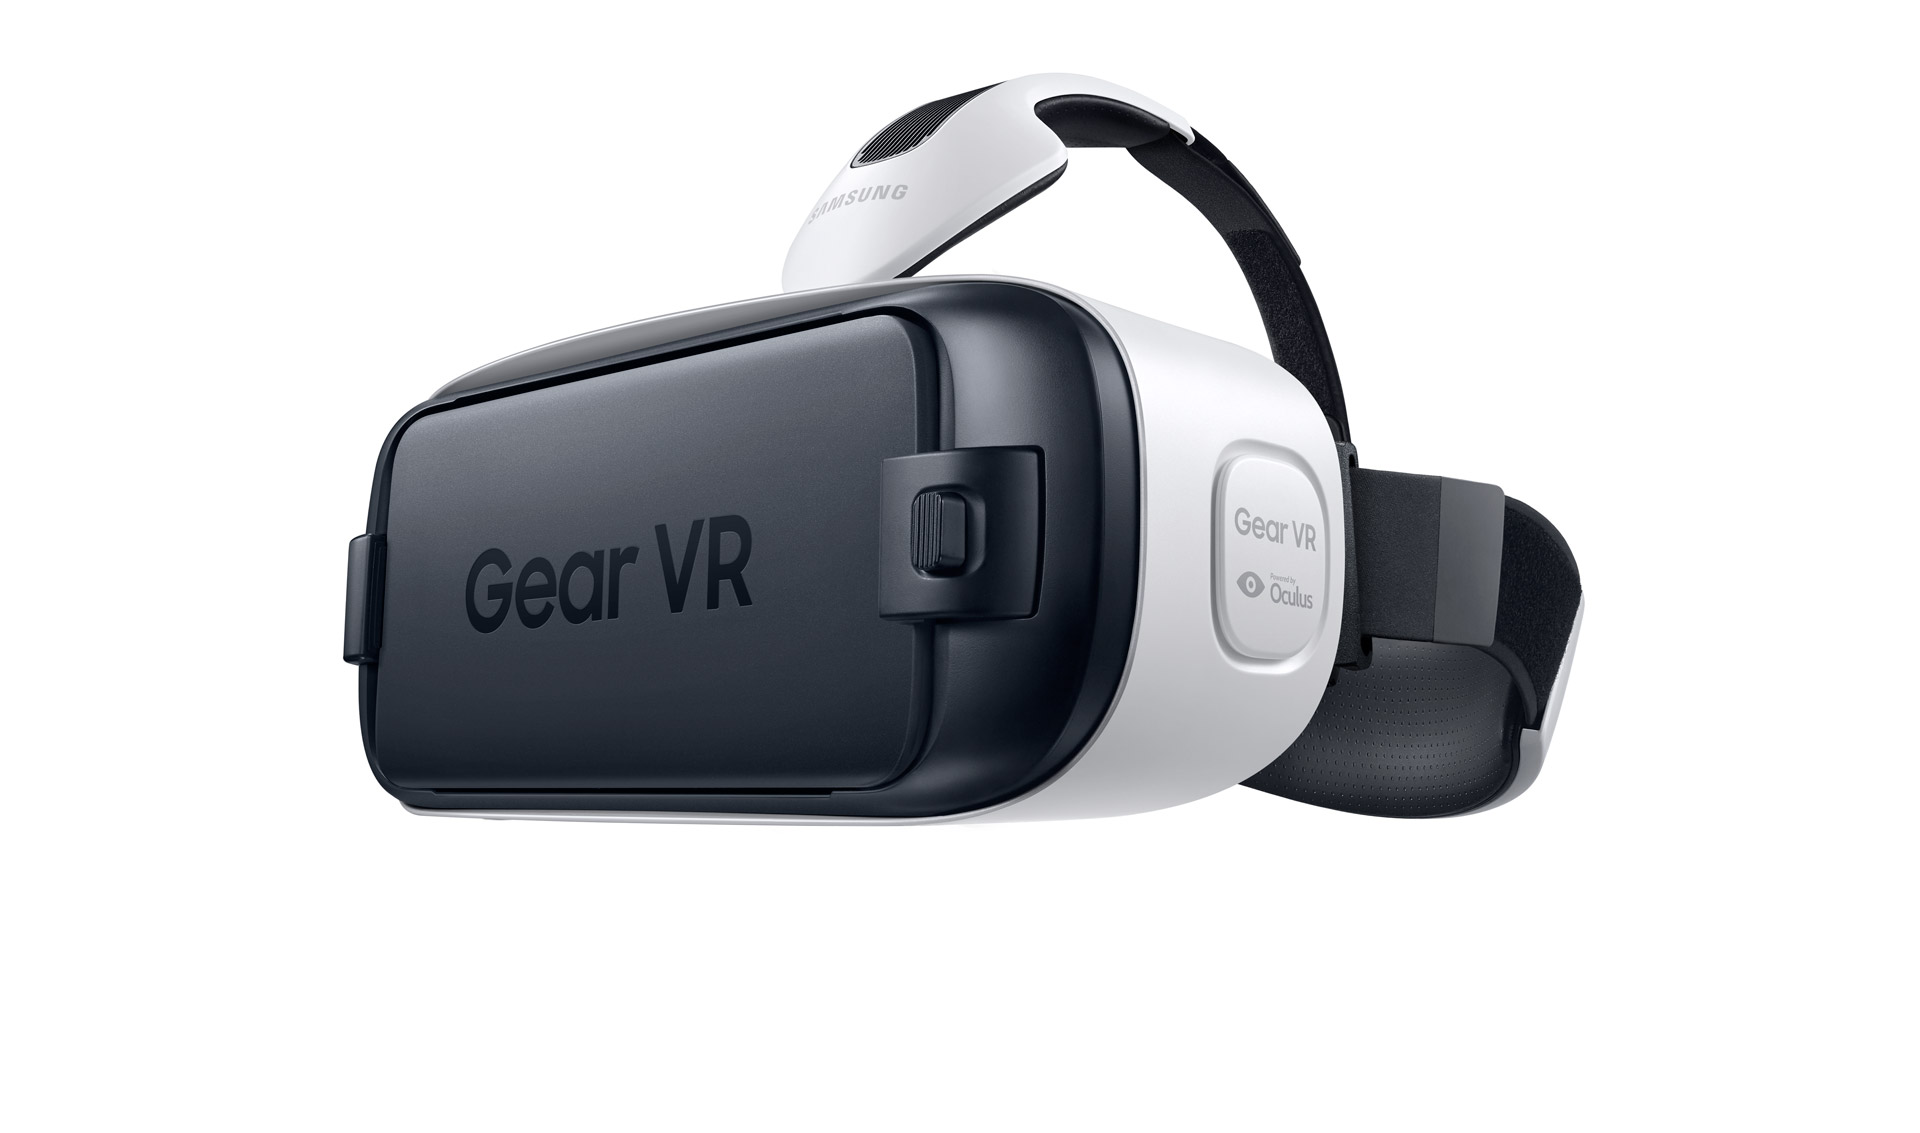 Gear VR for On Sale Today, Best Price-Matches Samsung – Road to VR